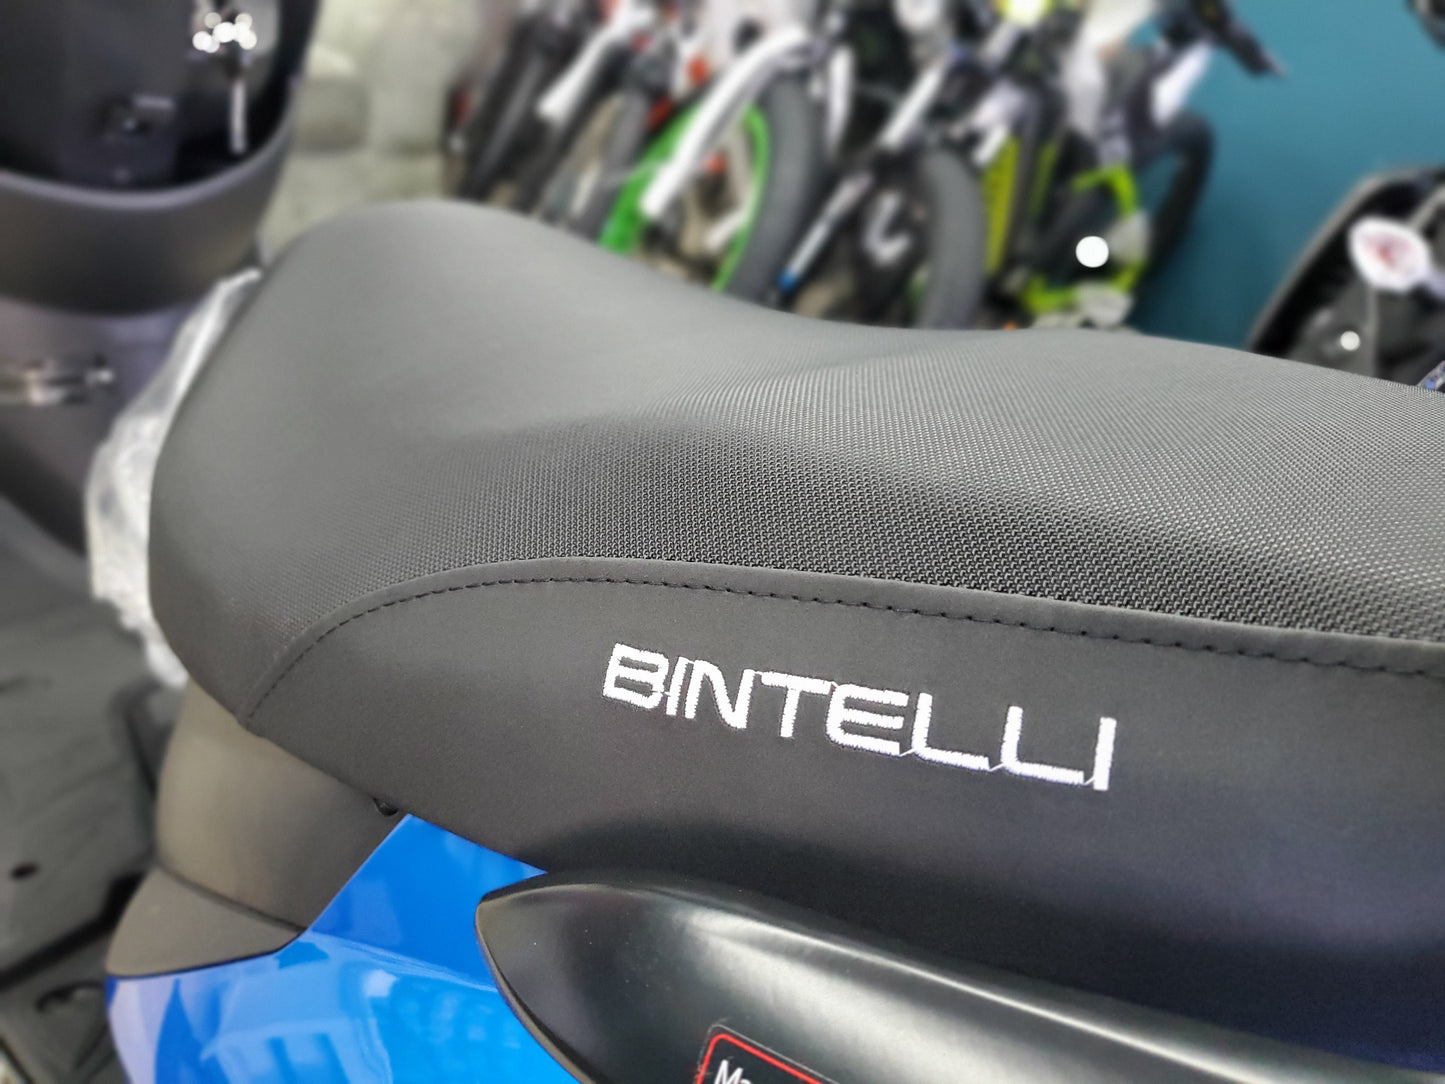 49CC BINTELLI SPRINT - Blue Color - See it in Store Today